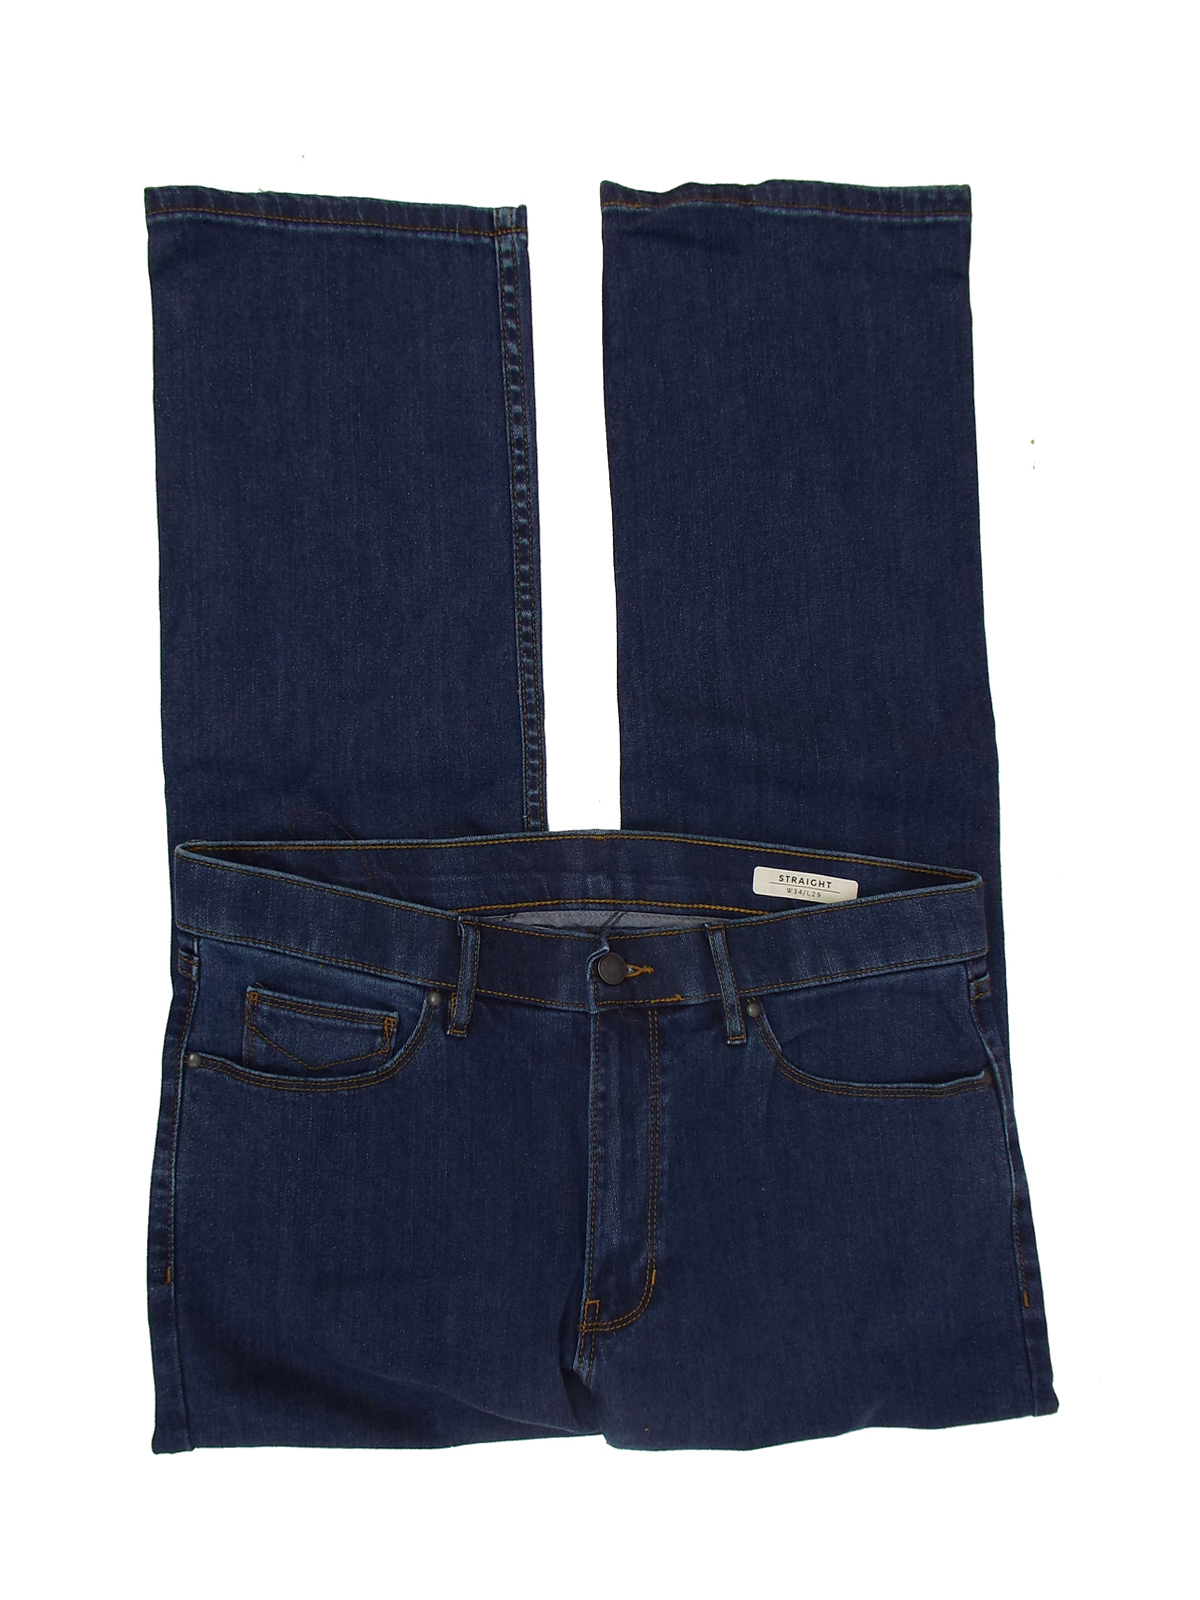 Marks and Spencer - - M&5 ASSORTED Mens Jeans - Waist Size 34 to 36 ...